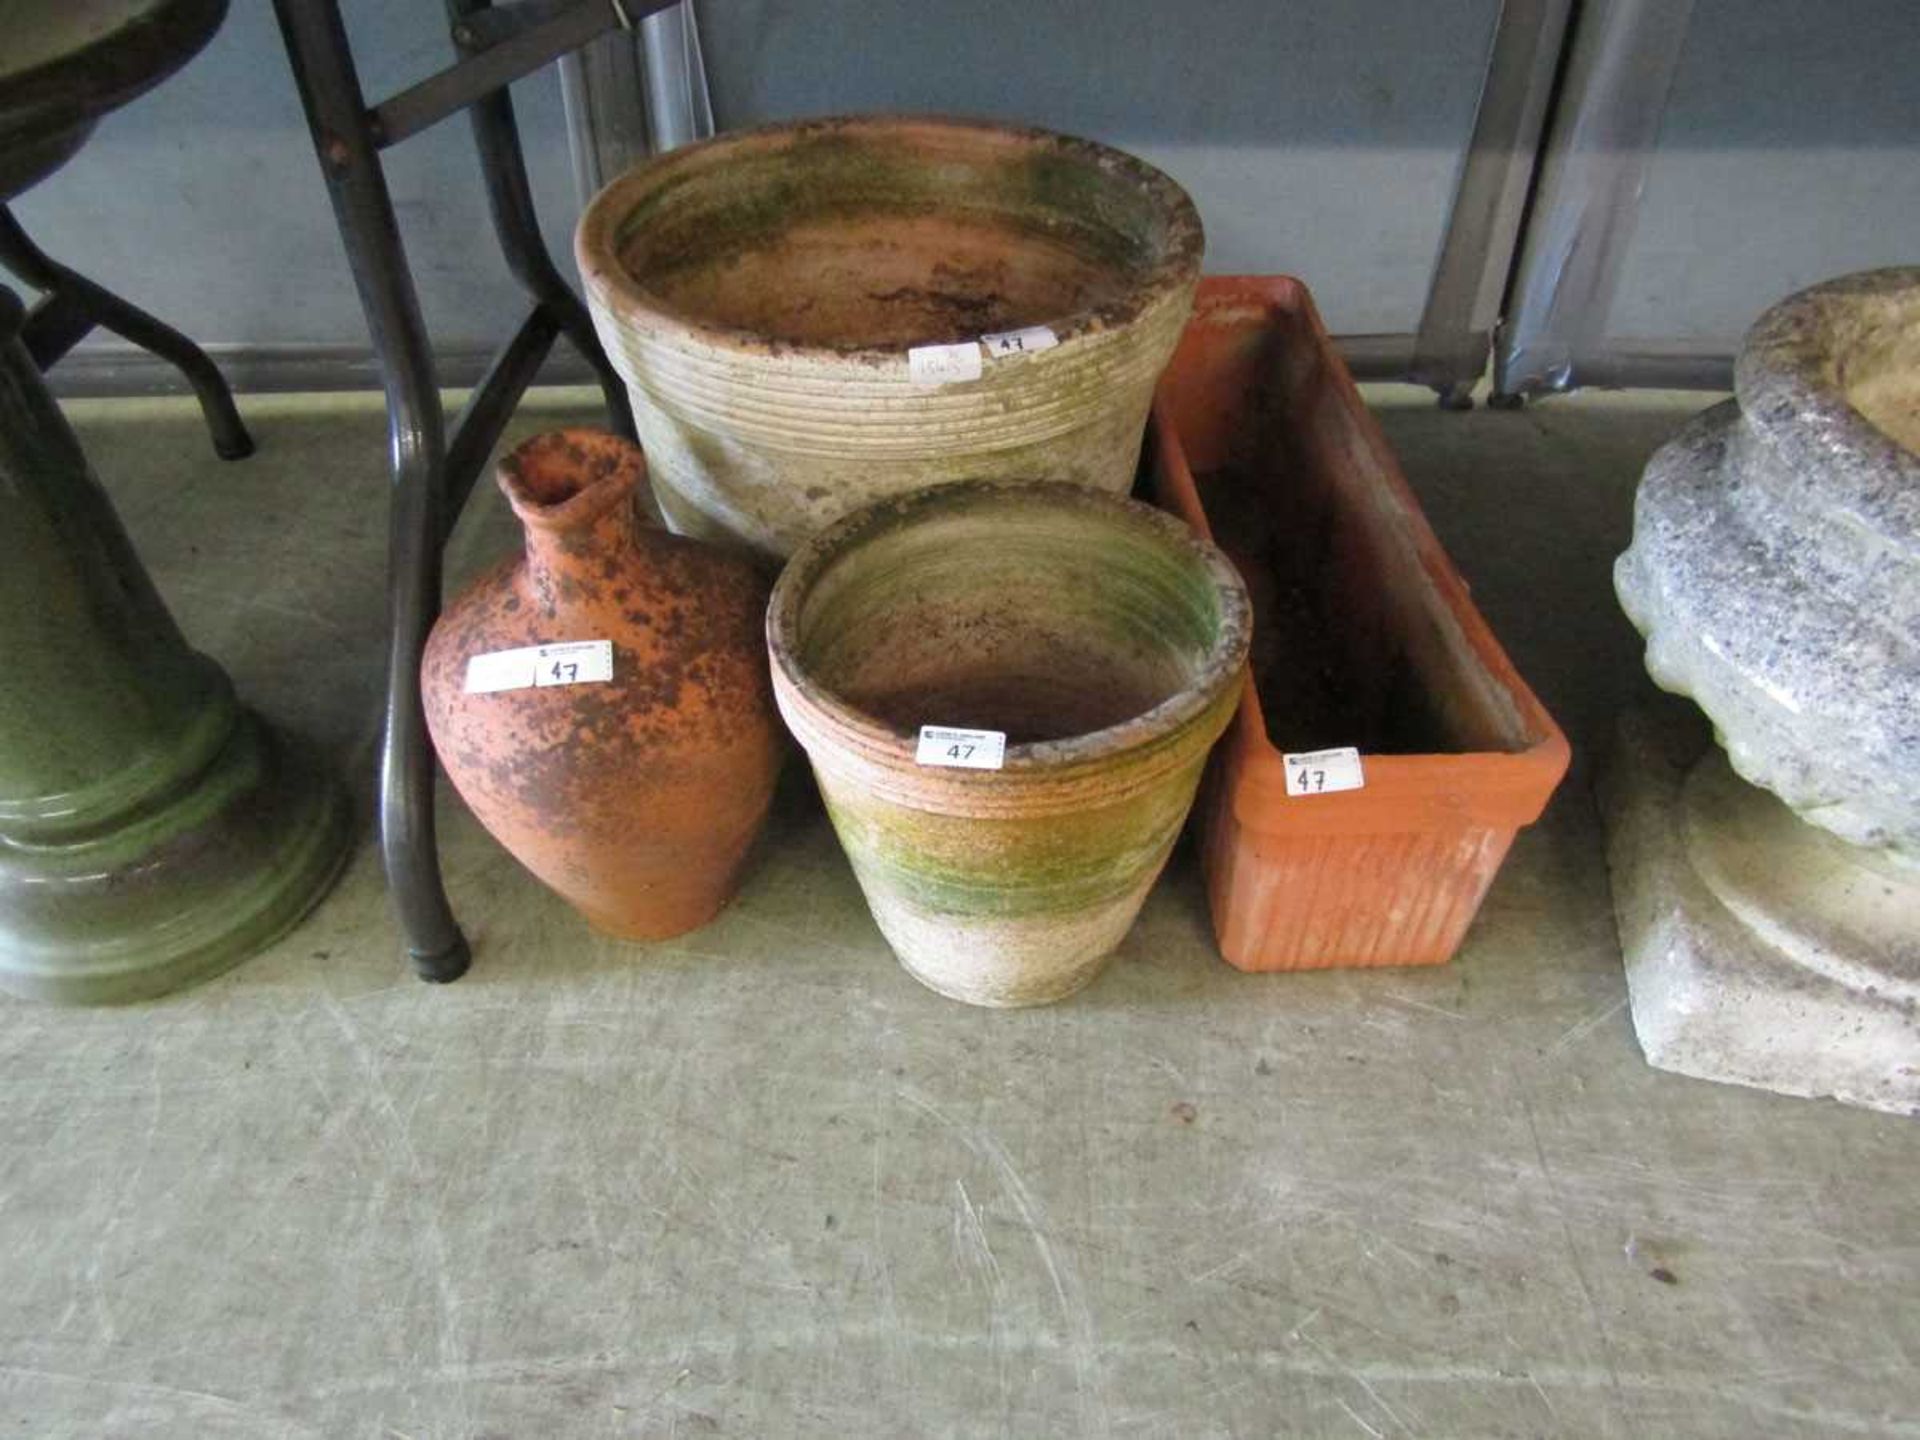 A selection of weathered garden clay pots and troughs